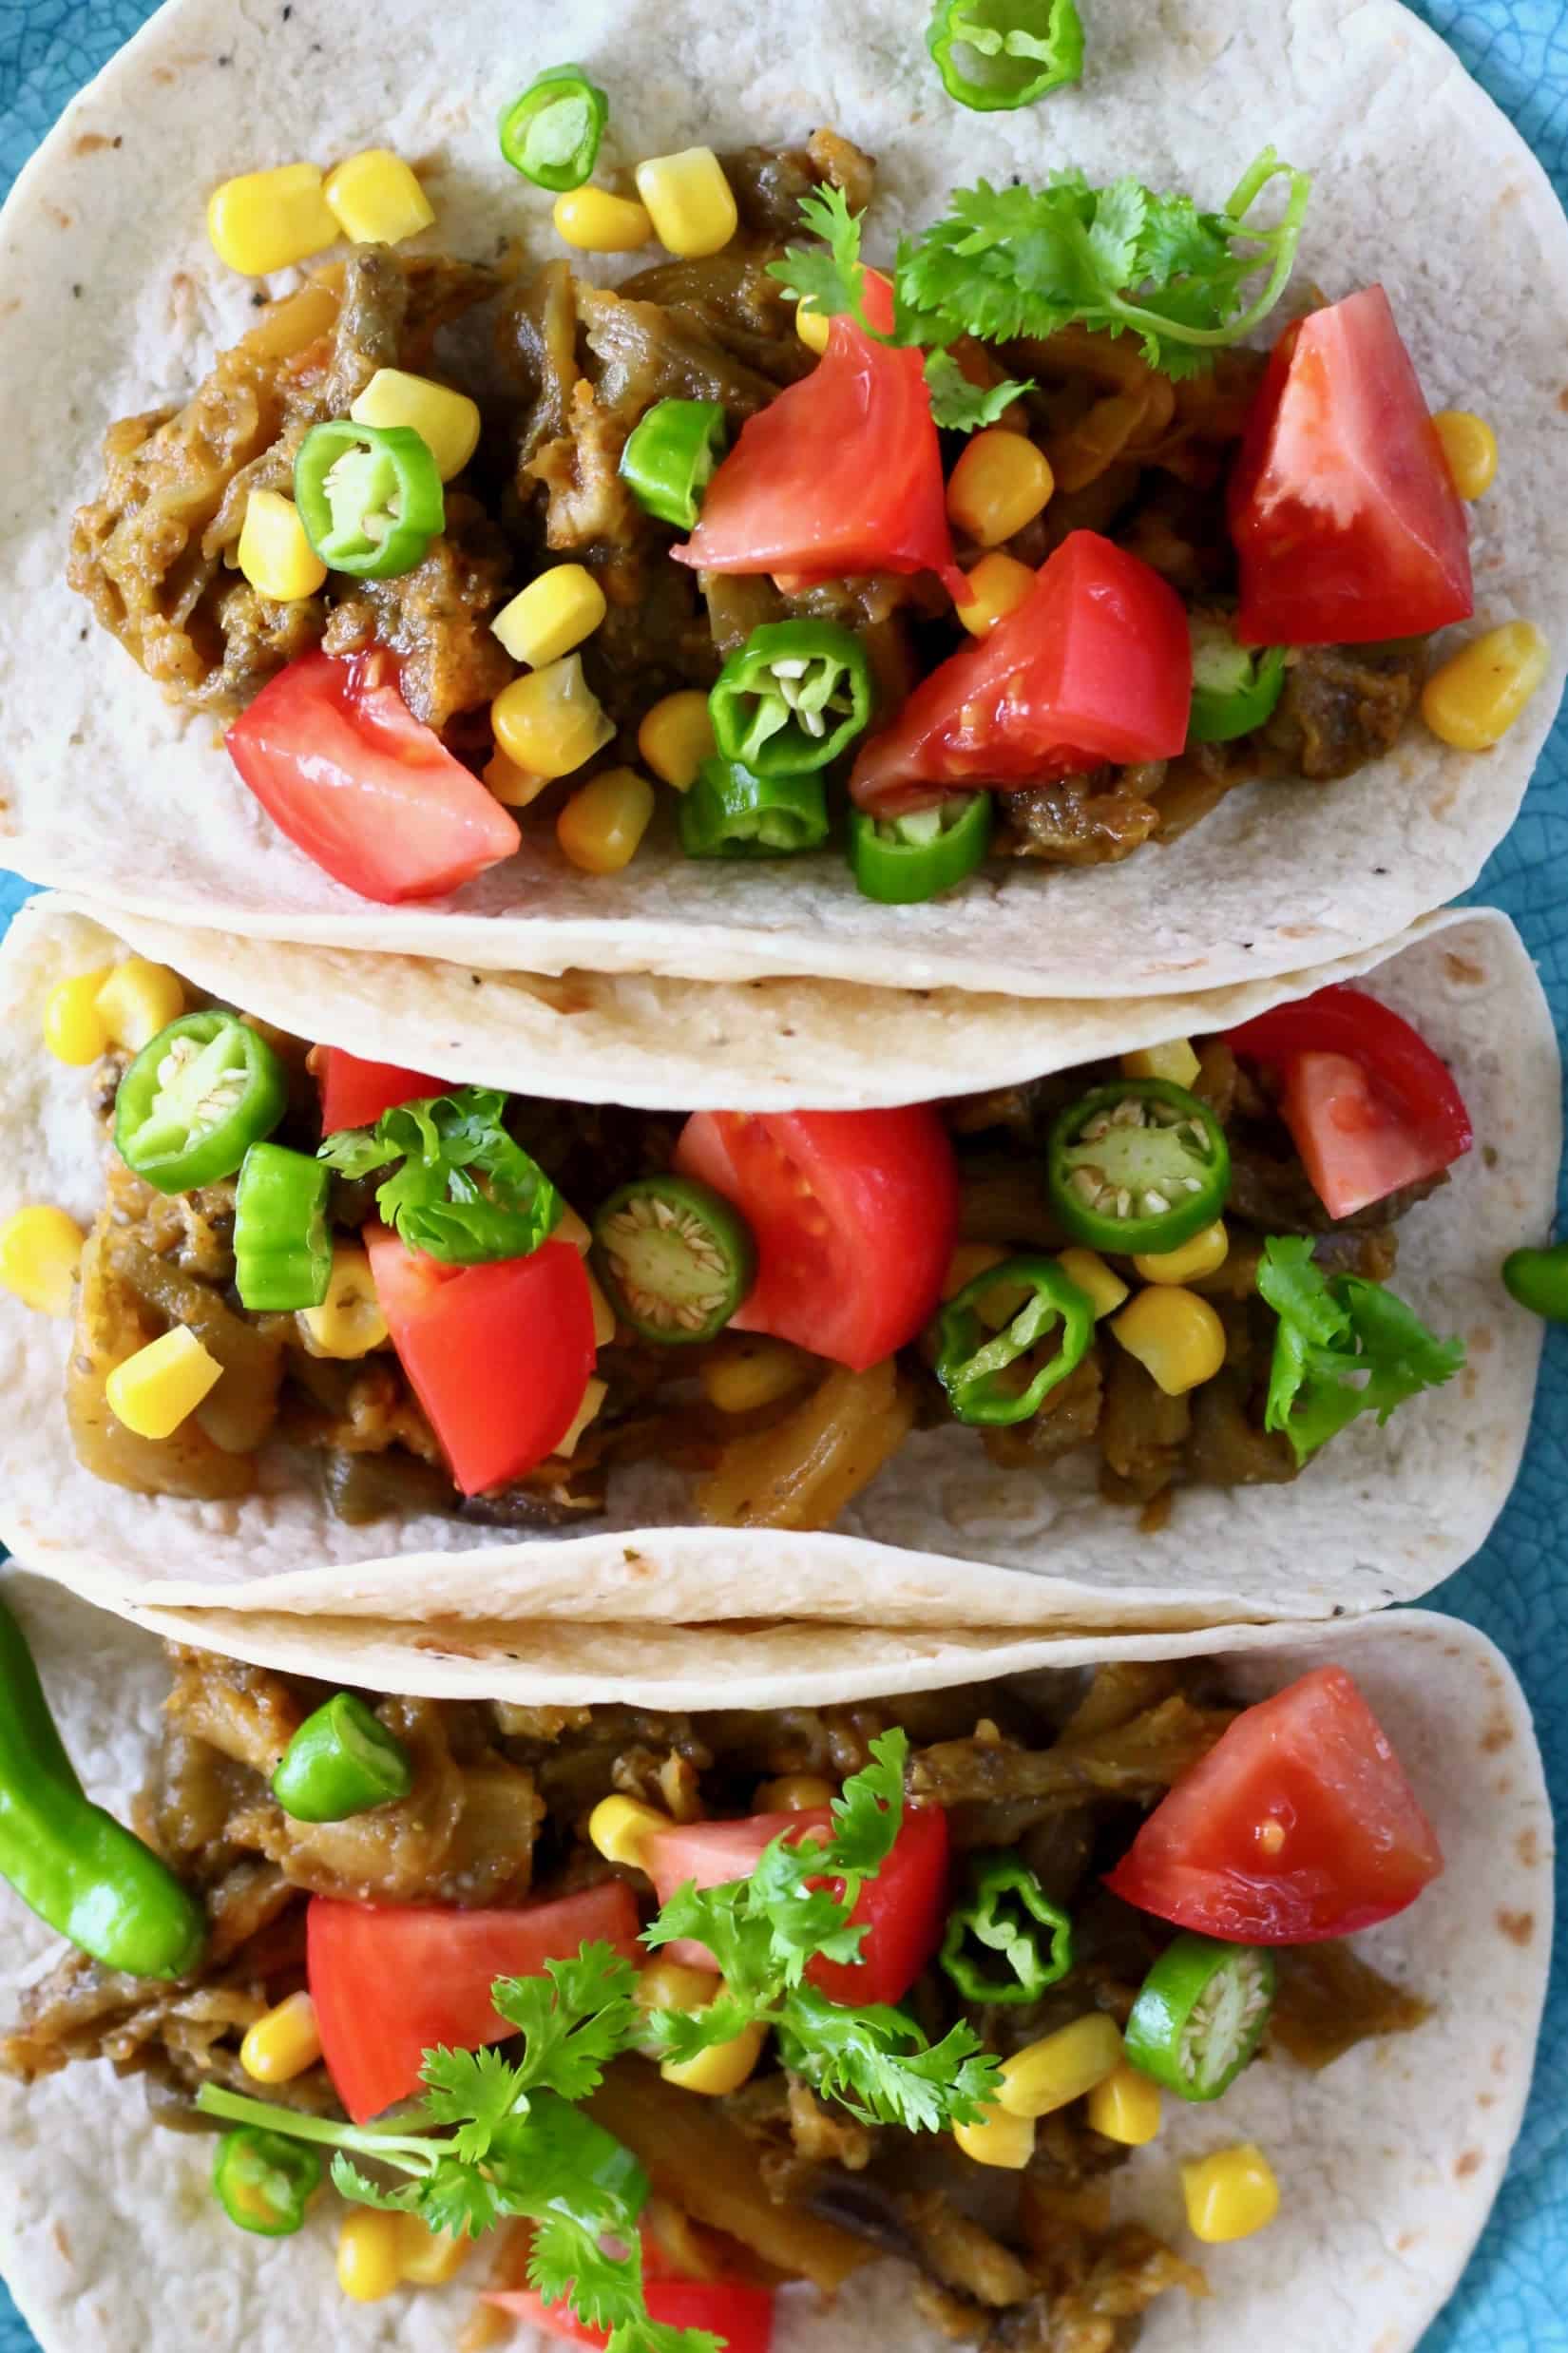 Photo of three tacos on a blue plate filled with roasted eggplant, sweetcorn, sliced green chilli, chopped tomatoes